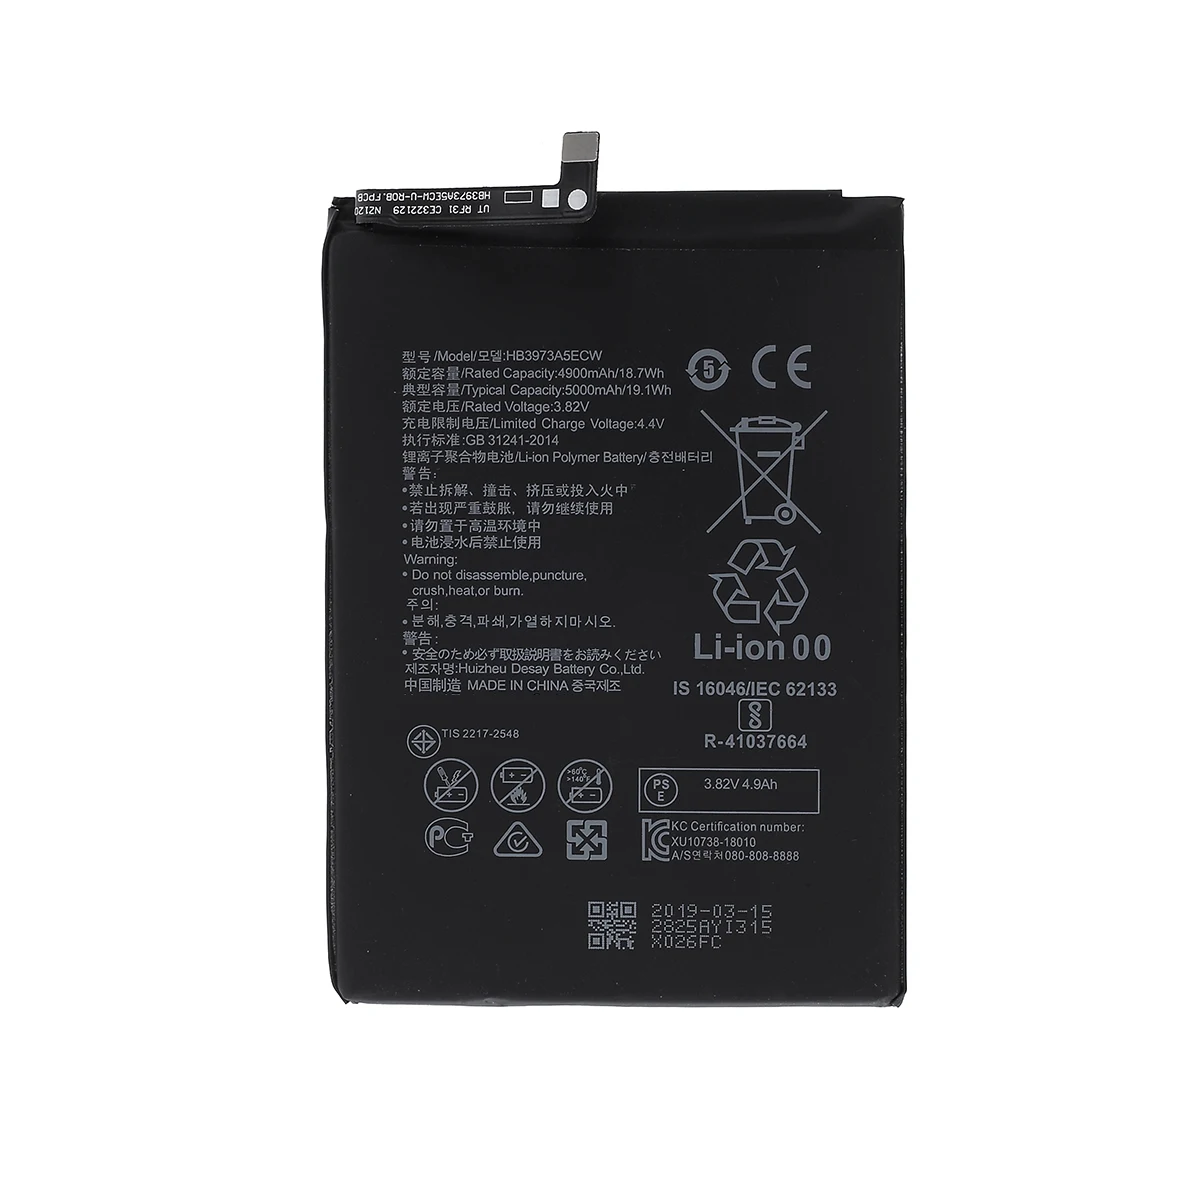 

HB3973A5ECW Battery 4900mAh Replacement Part for Huawei Honor Note 10 / Mate 20 X / Honor 8X Max